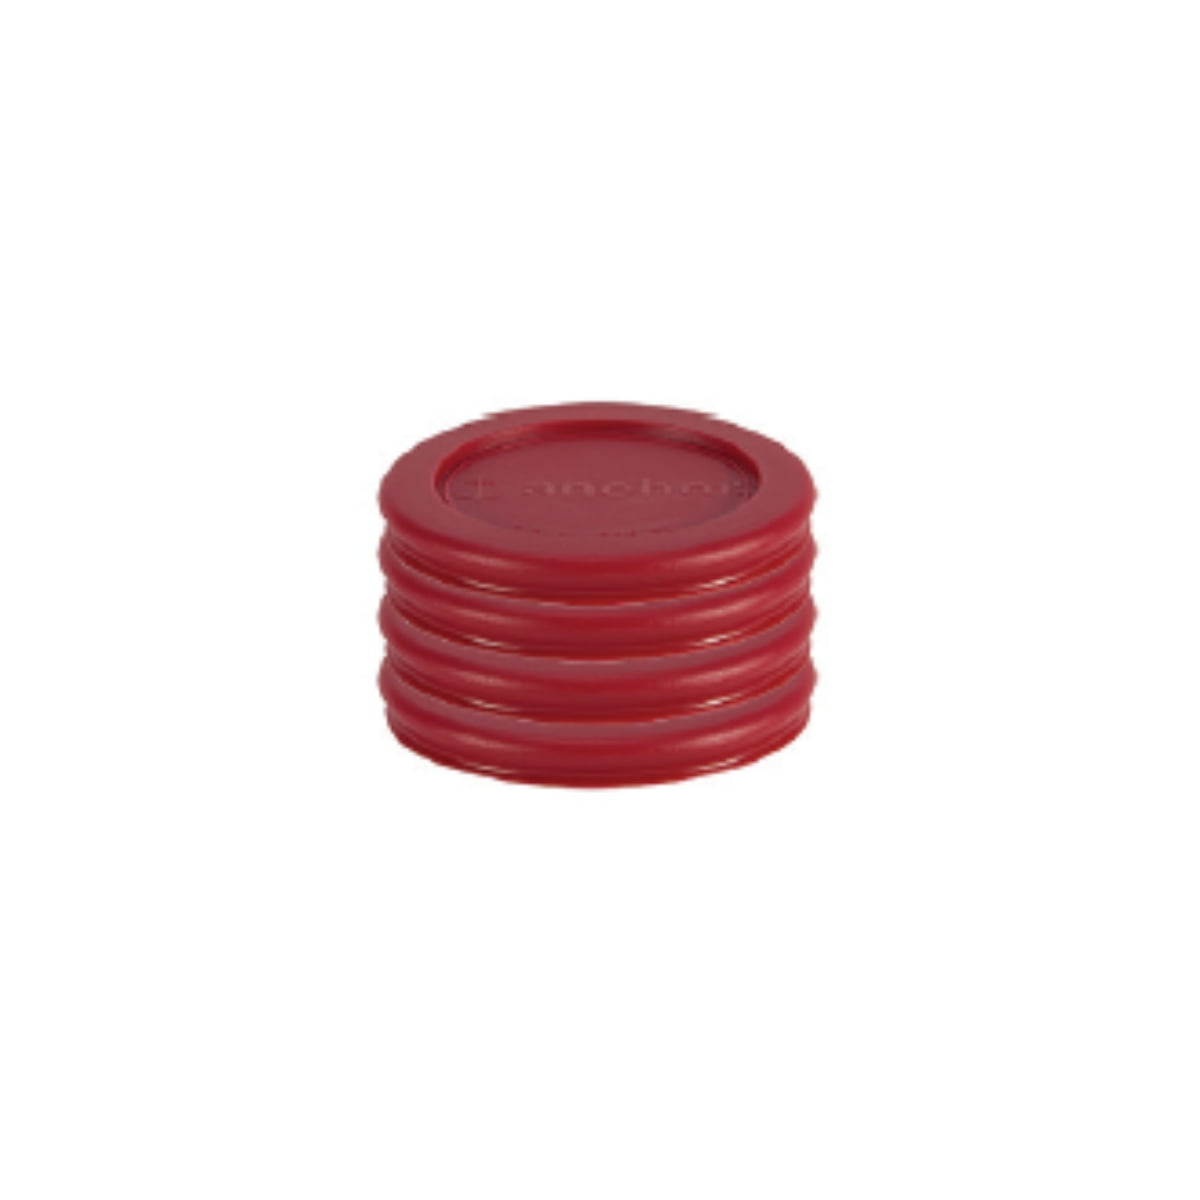 set of 2 1.75 qt Details about   Anchor Hocking Replacement lid for 7 cup Round 